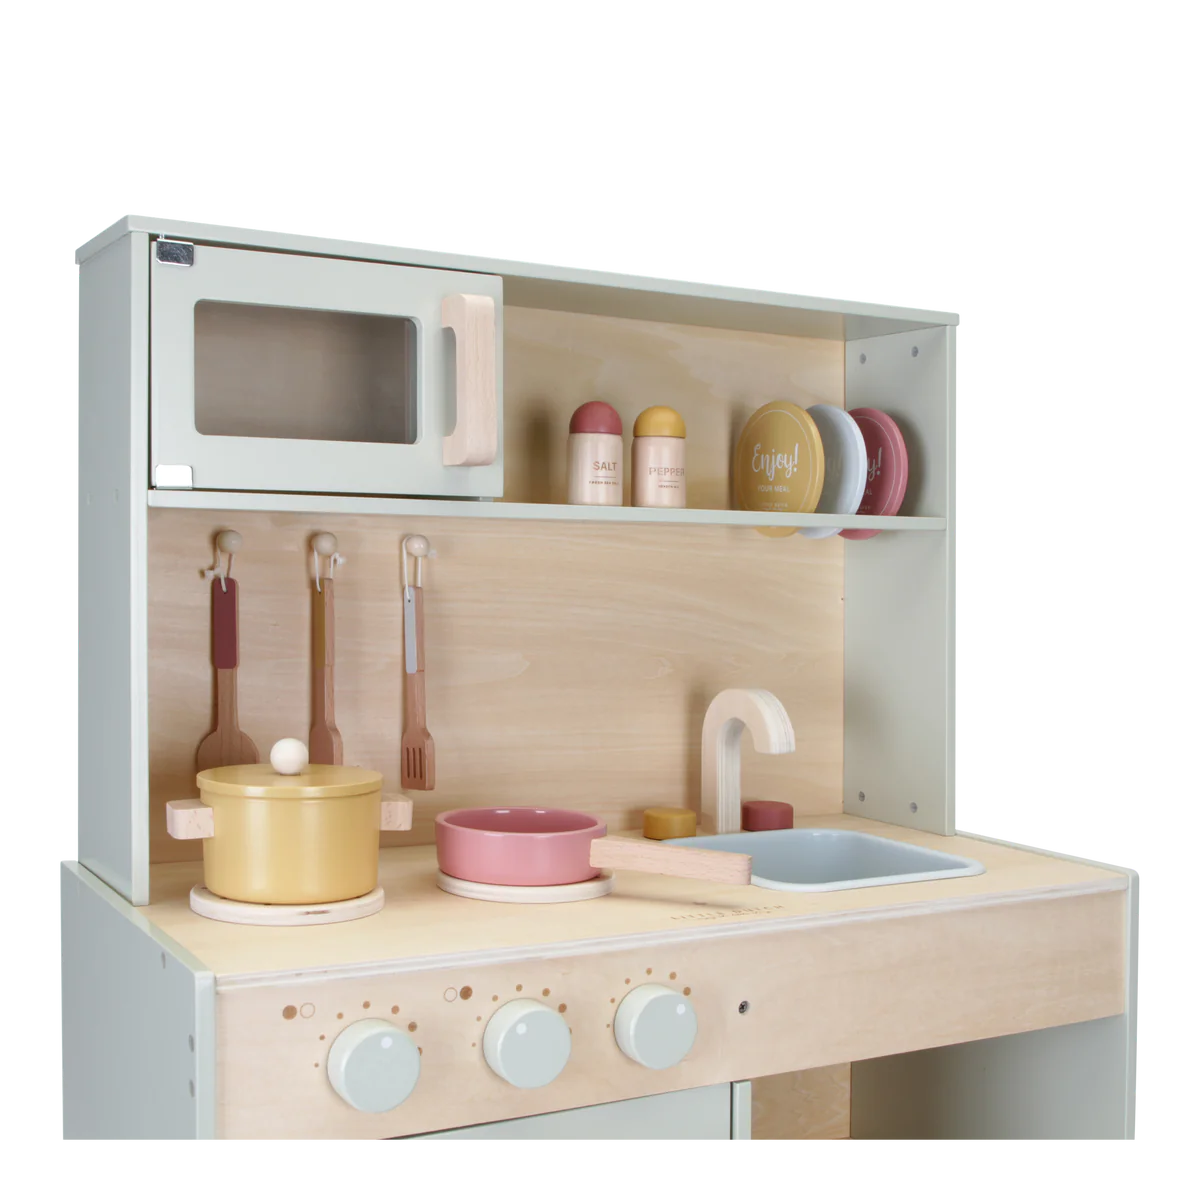 Little Dutch Play Kitchen comes with several accessories for added play value including pots and pans, utensils, plates and salt and pepper shakers